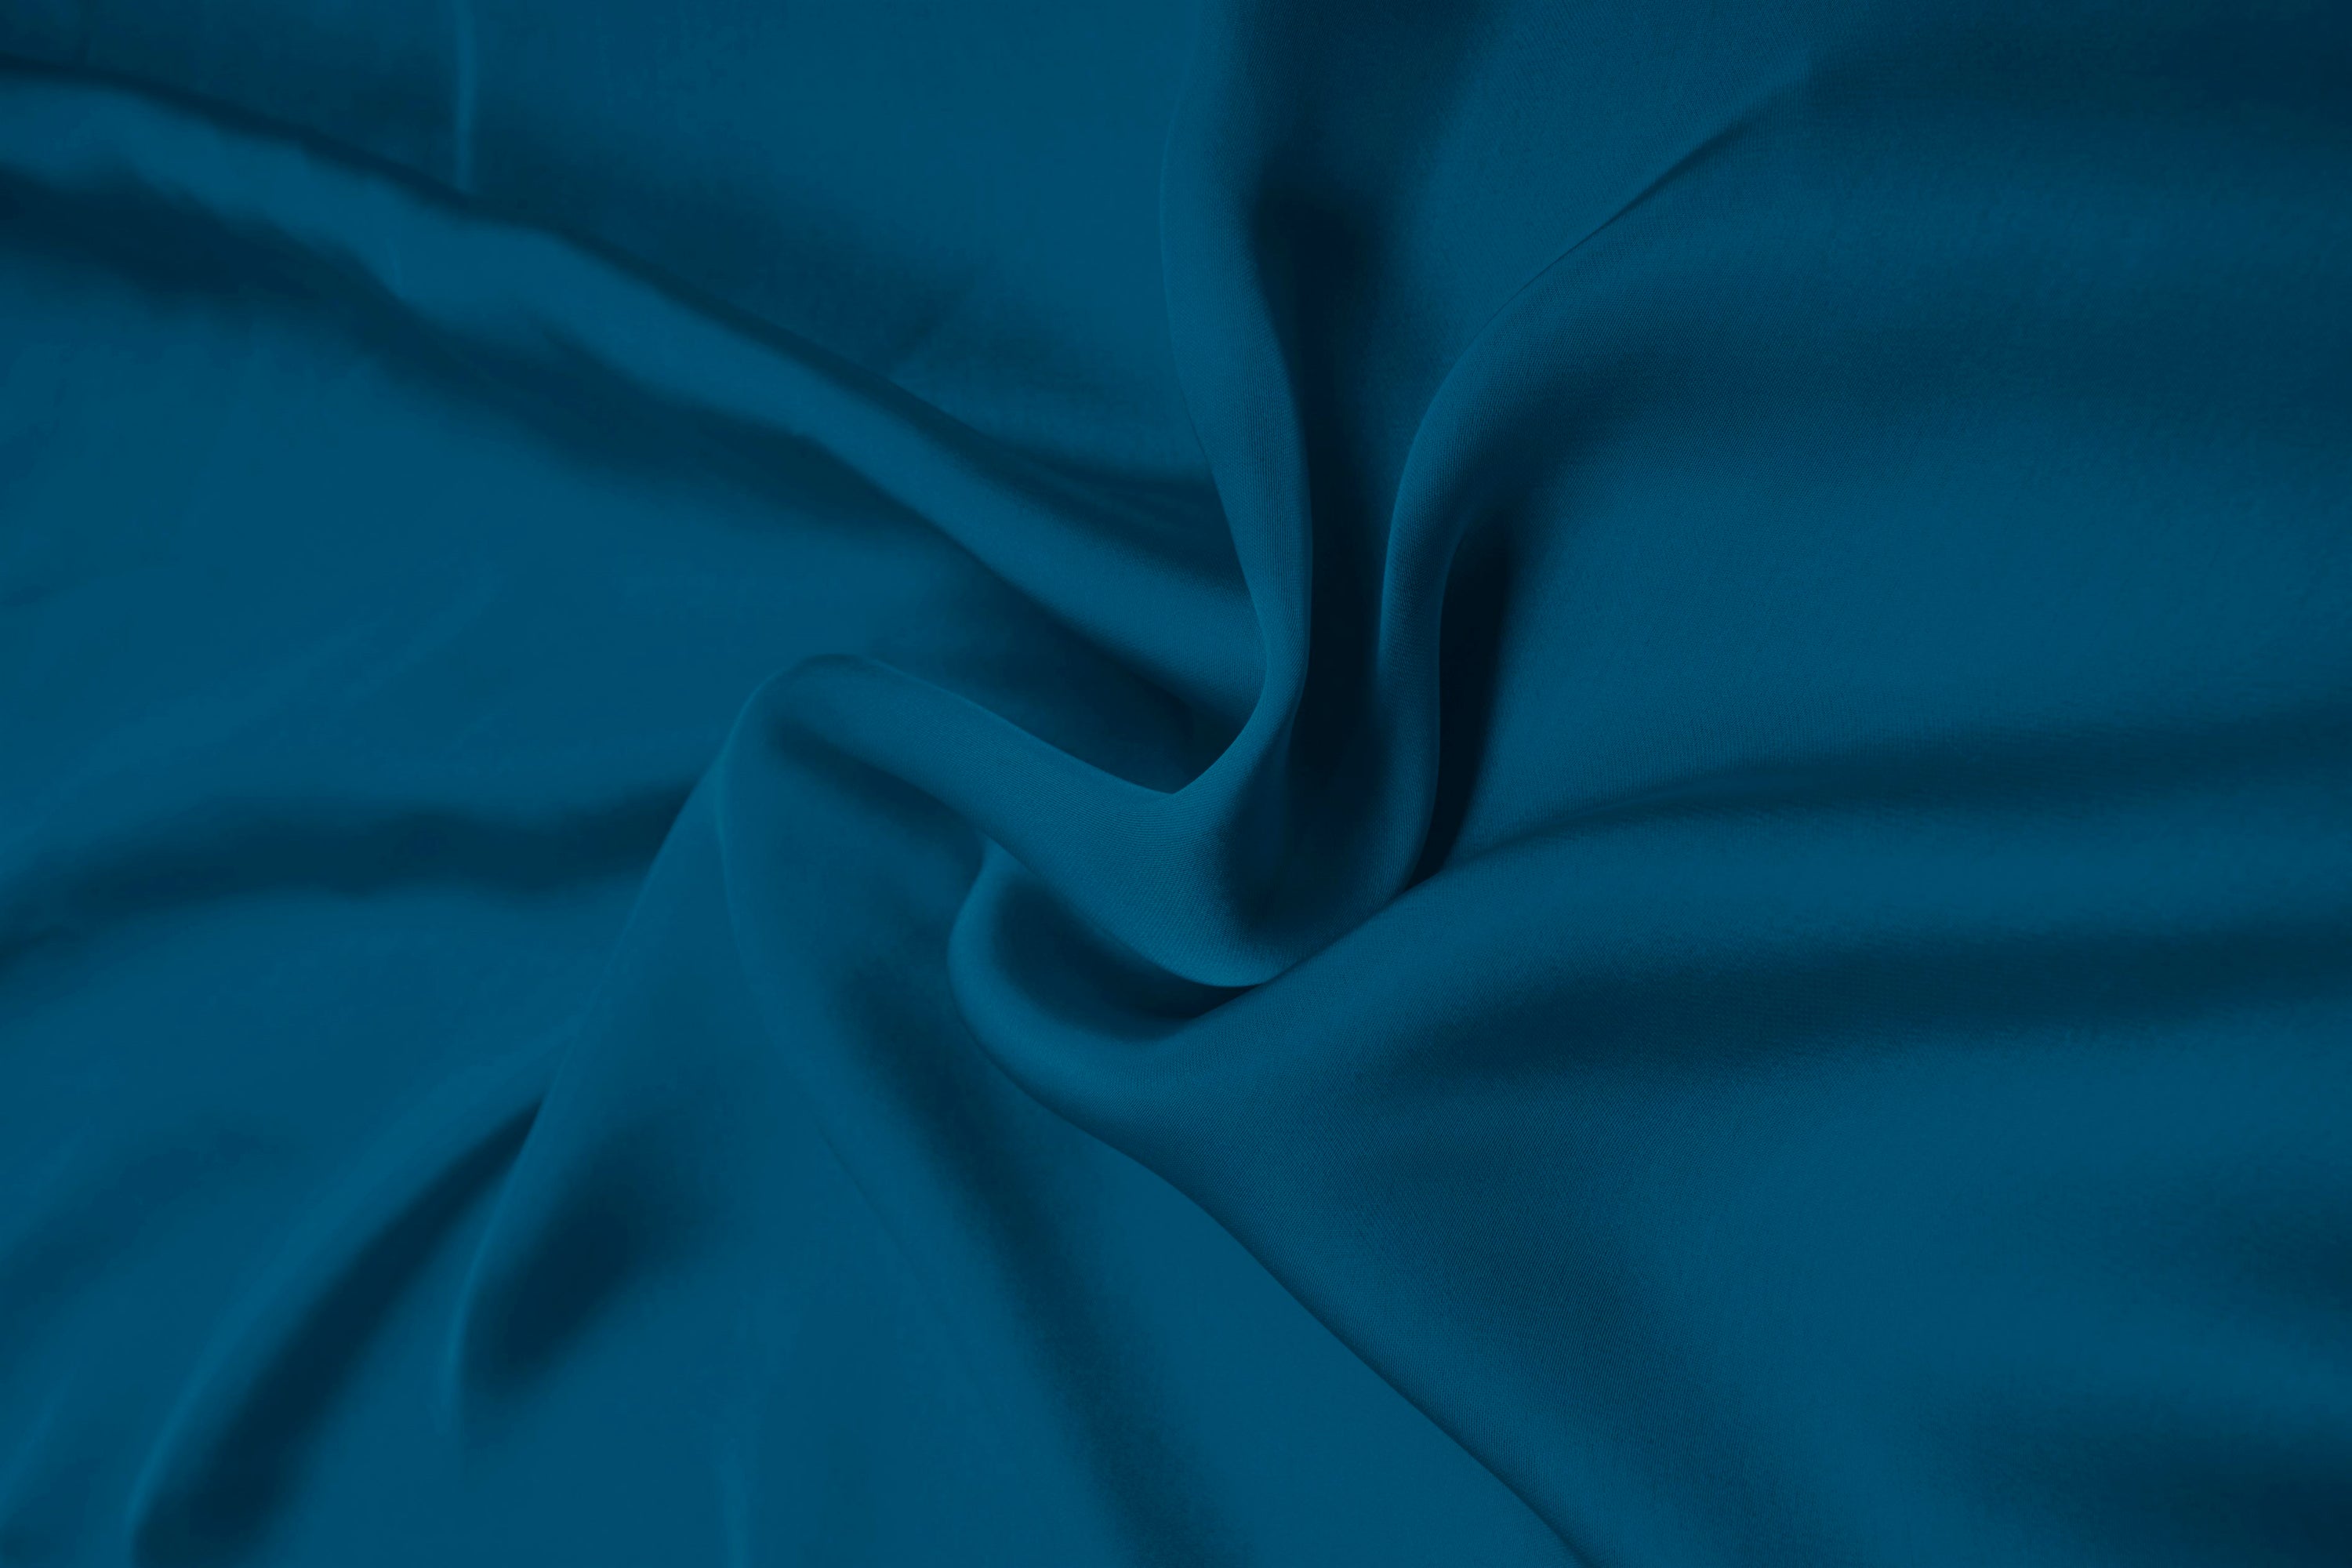 Cationic Dark Teal Plain Dyed Satin Georgette Fabric